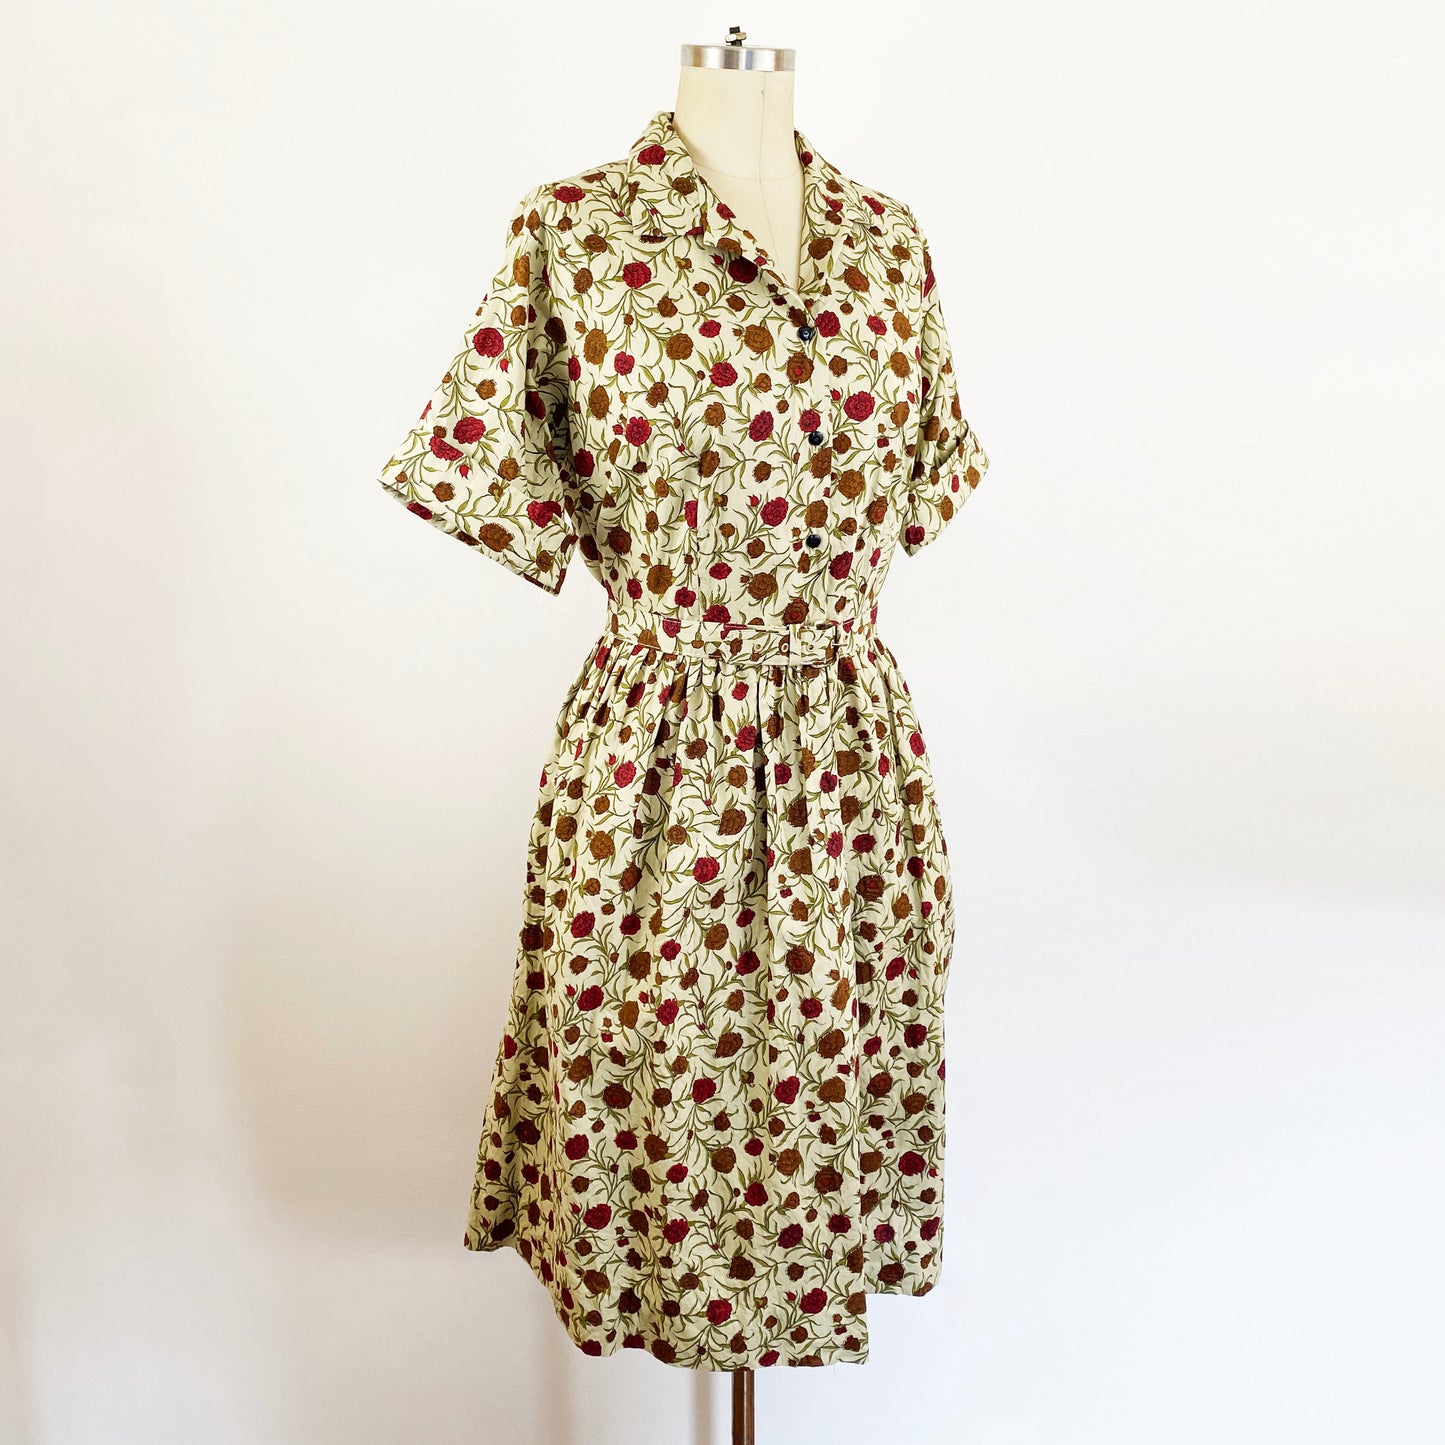 1950s Cotton Autumn Floral Carnation Light Green and Red Fit and Flare Shirtwaist Dress Day Dress / Vintage Plus Size XL 12